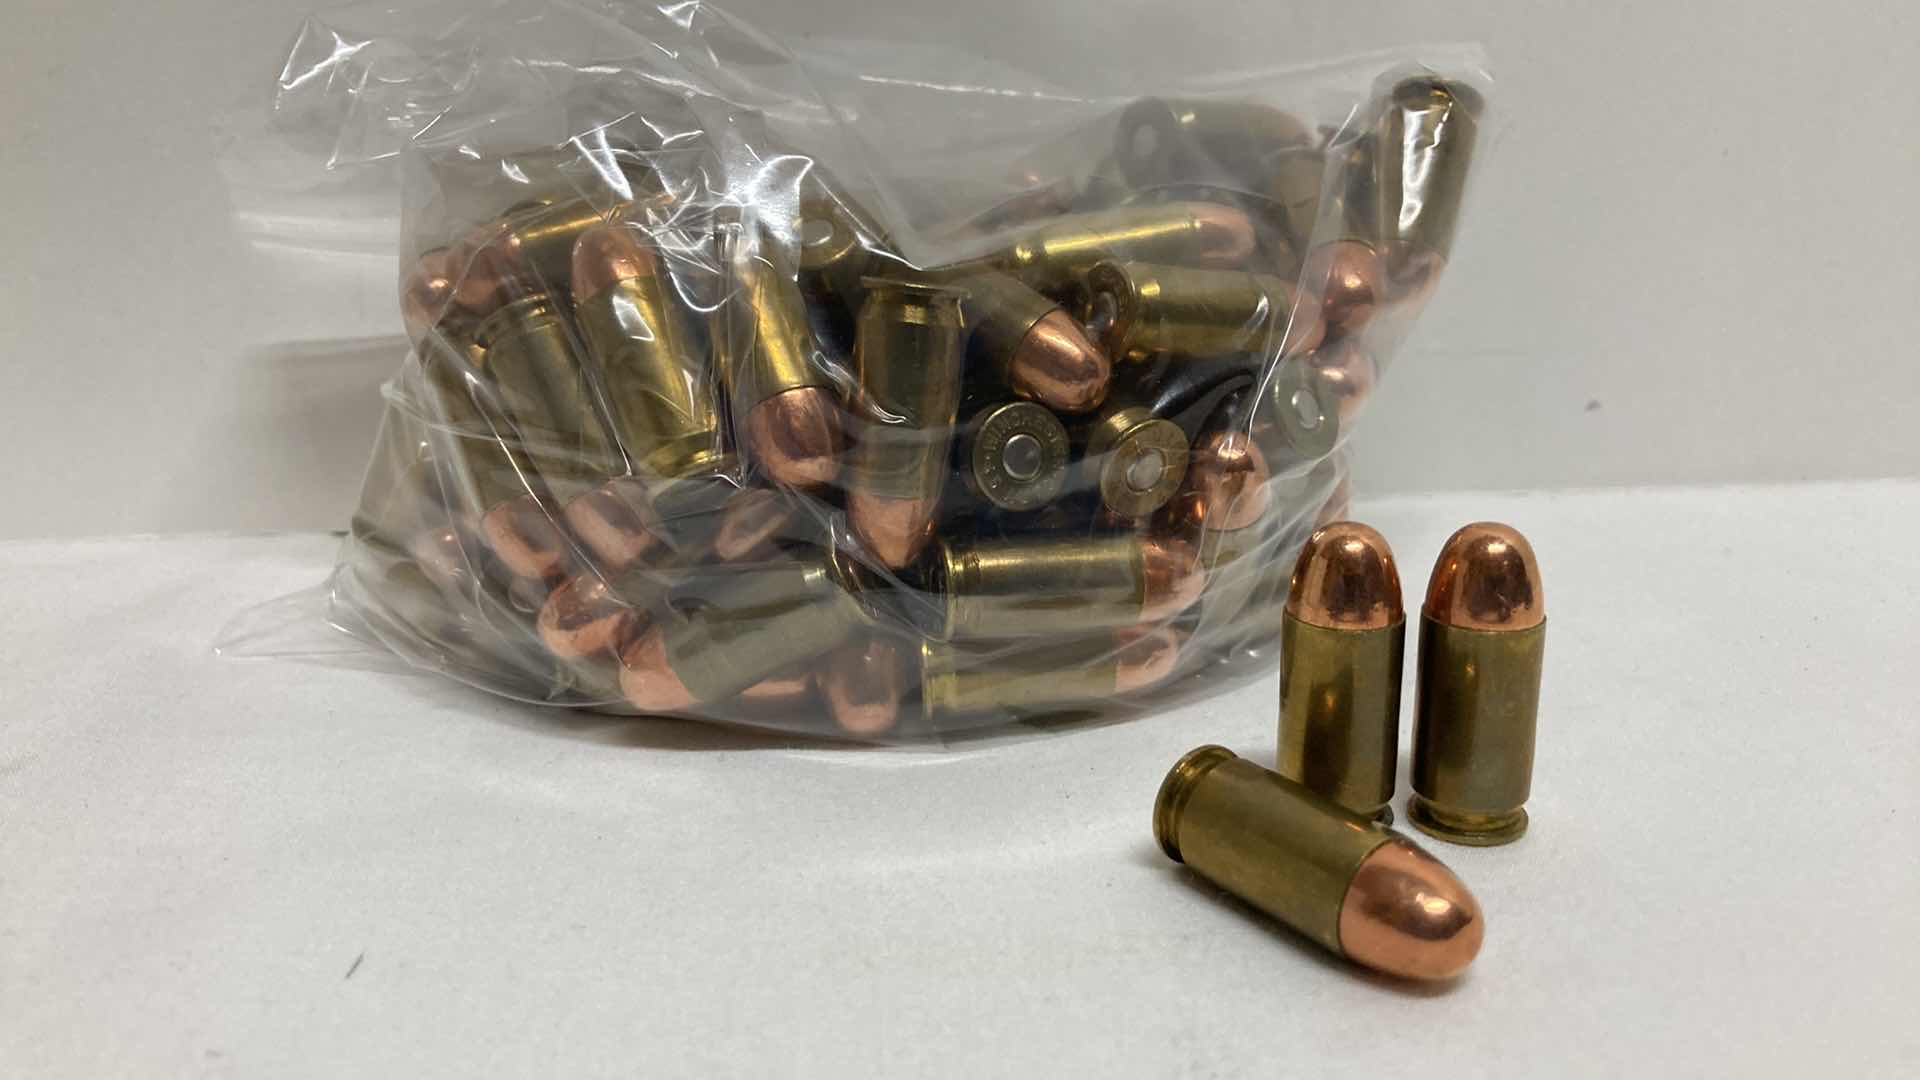 Photo 1 of WASHOUGAL RIVER CARTRIDGE COMPANY 45 ACP 230GR TMJ BRASS CASE AMMO RELOADS (131RDS)